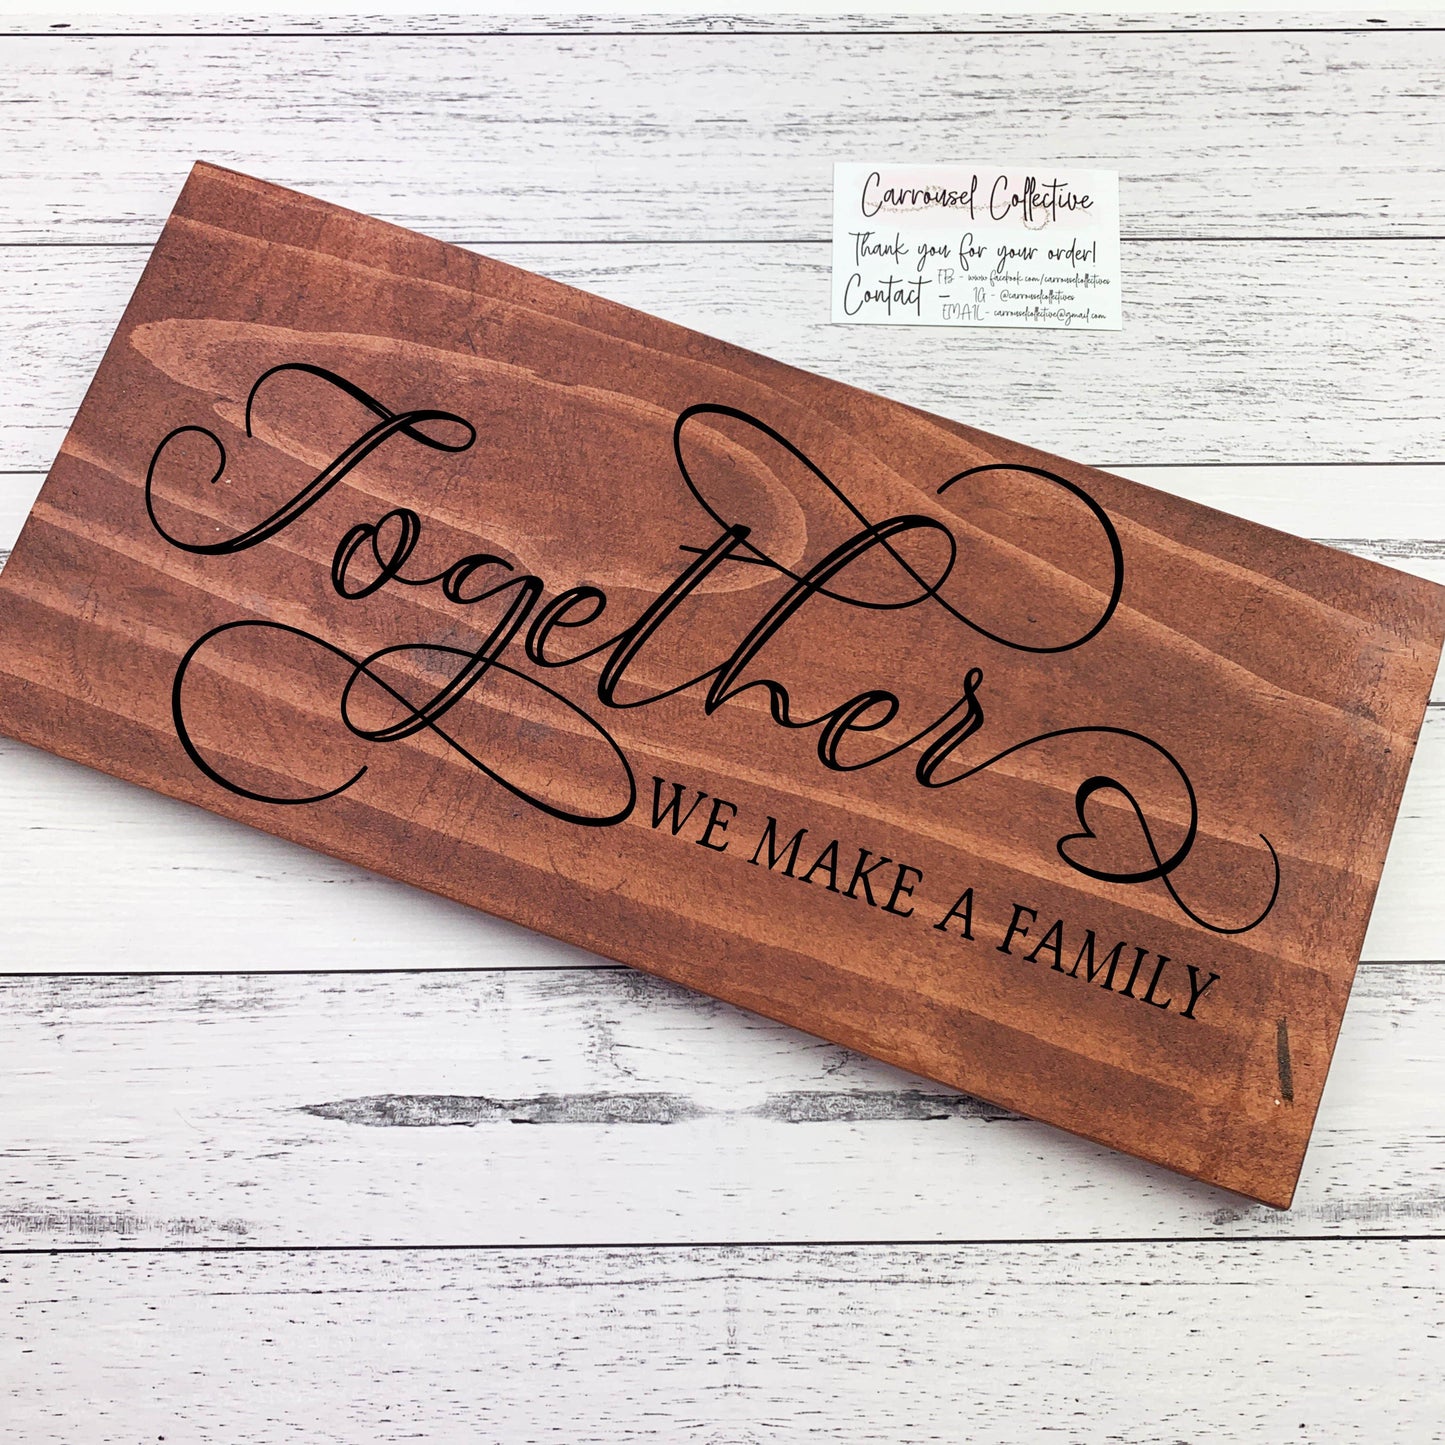 Together we make a Family wood sign, quote sign, rustic decor, home decor